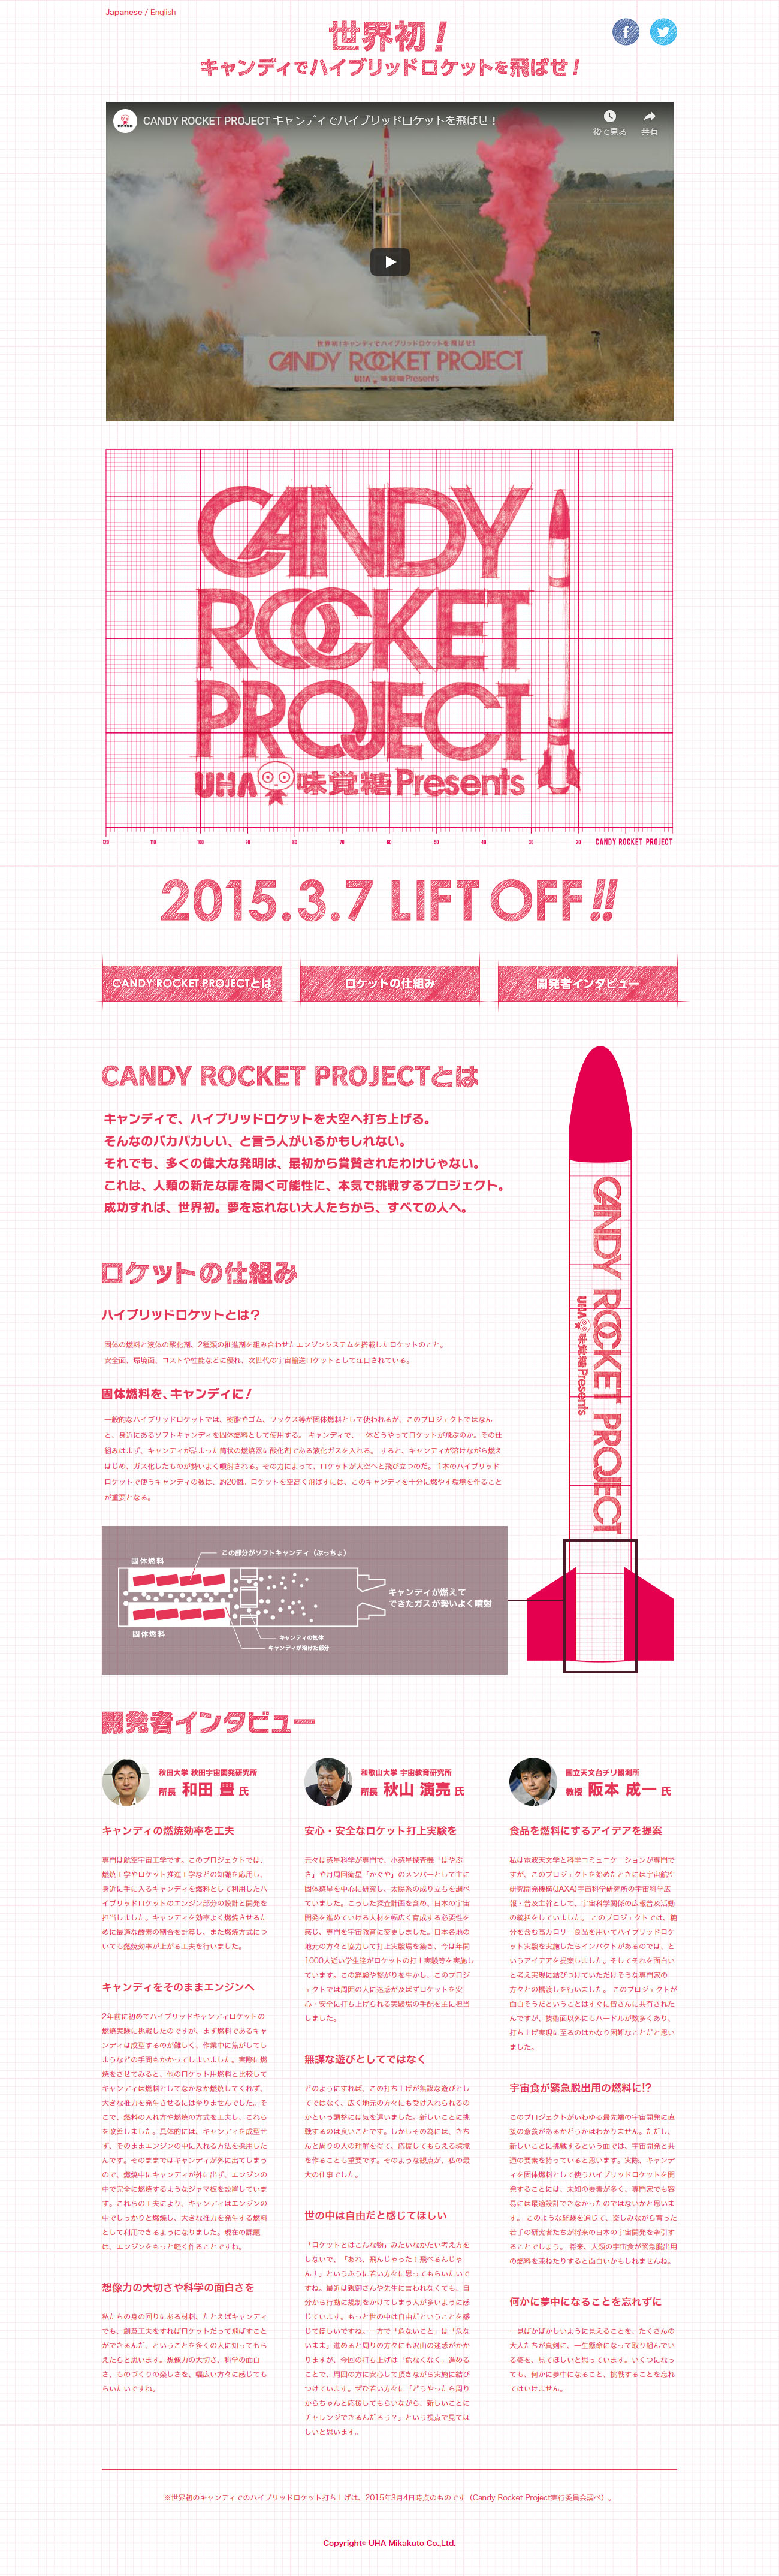 CANDY ROCKET PROJECT_pc_1